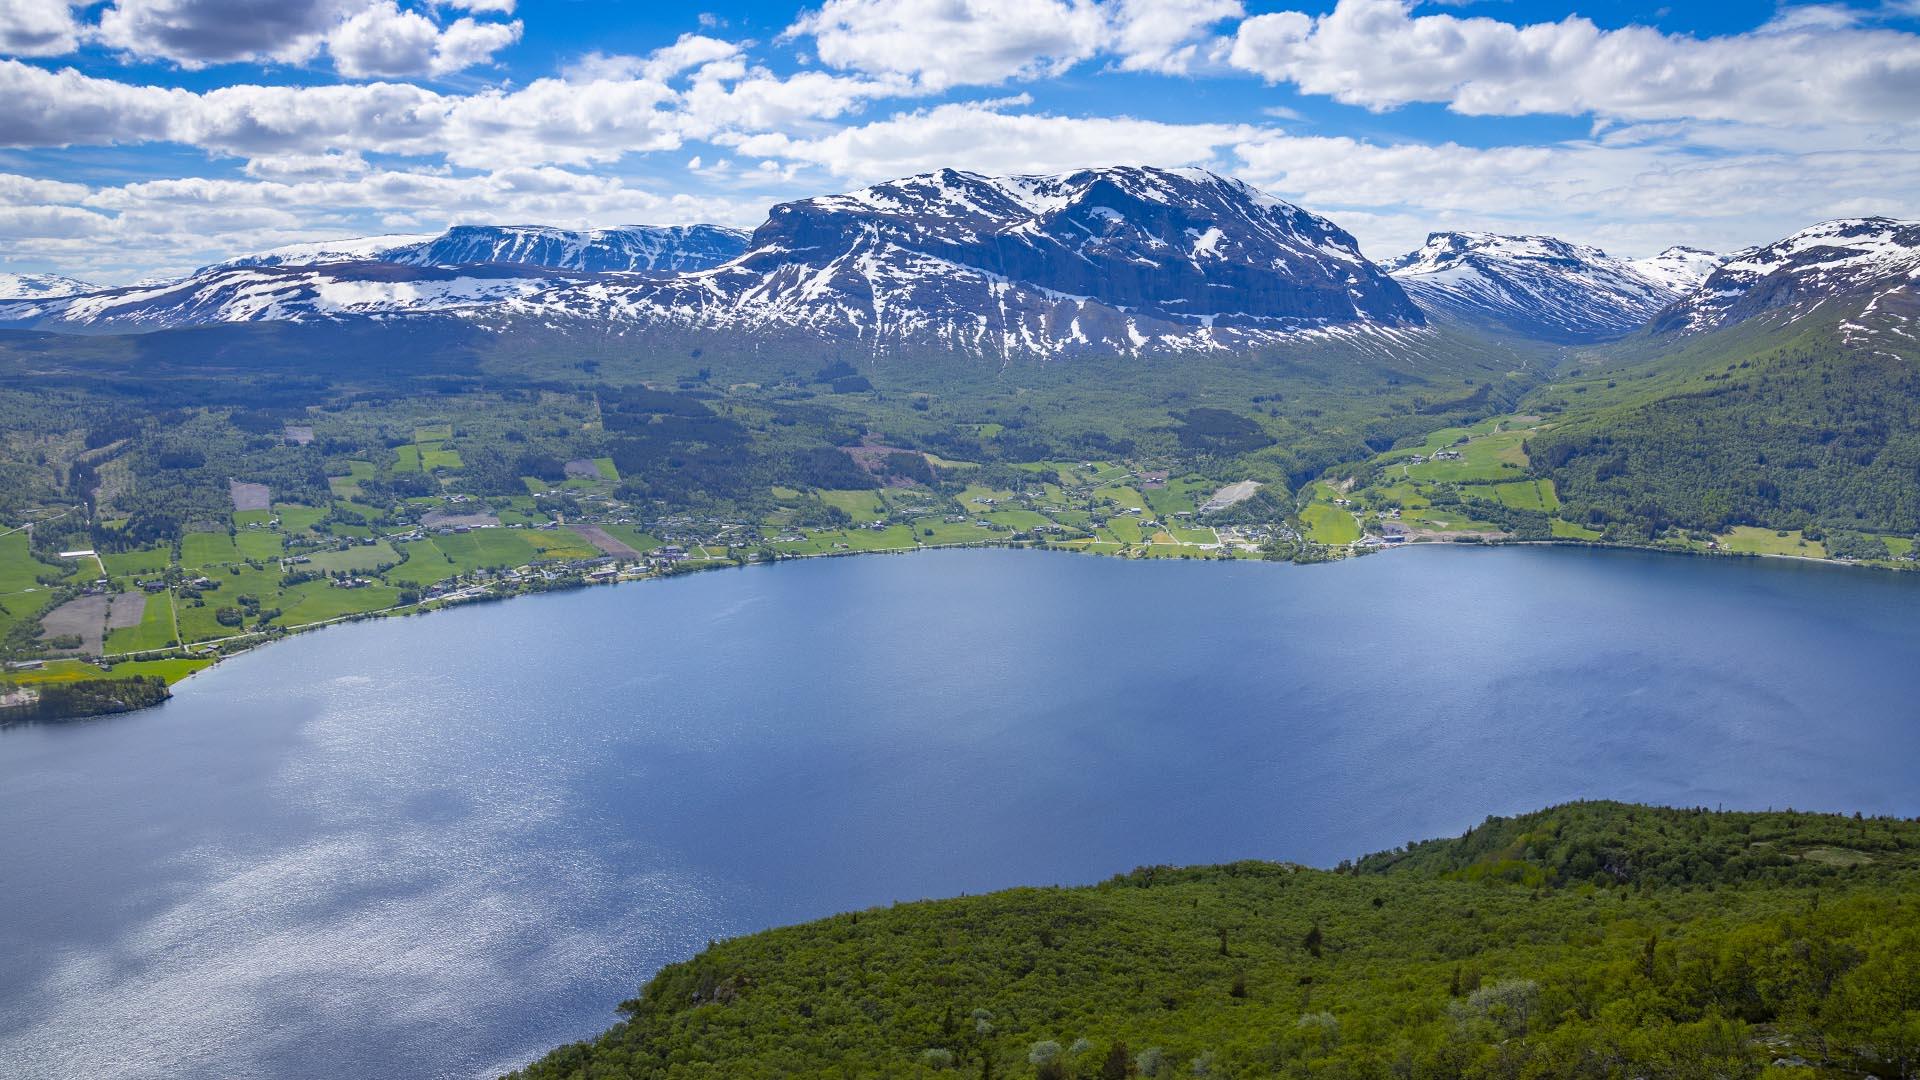 View from a highpoint over a large blue lake. On the other side there are green fields and forets patches on the base of a large mountain massiv with still some snow. Blue sky and white summer clouds.